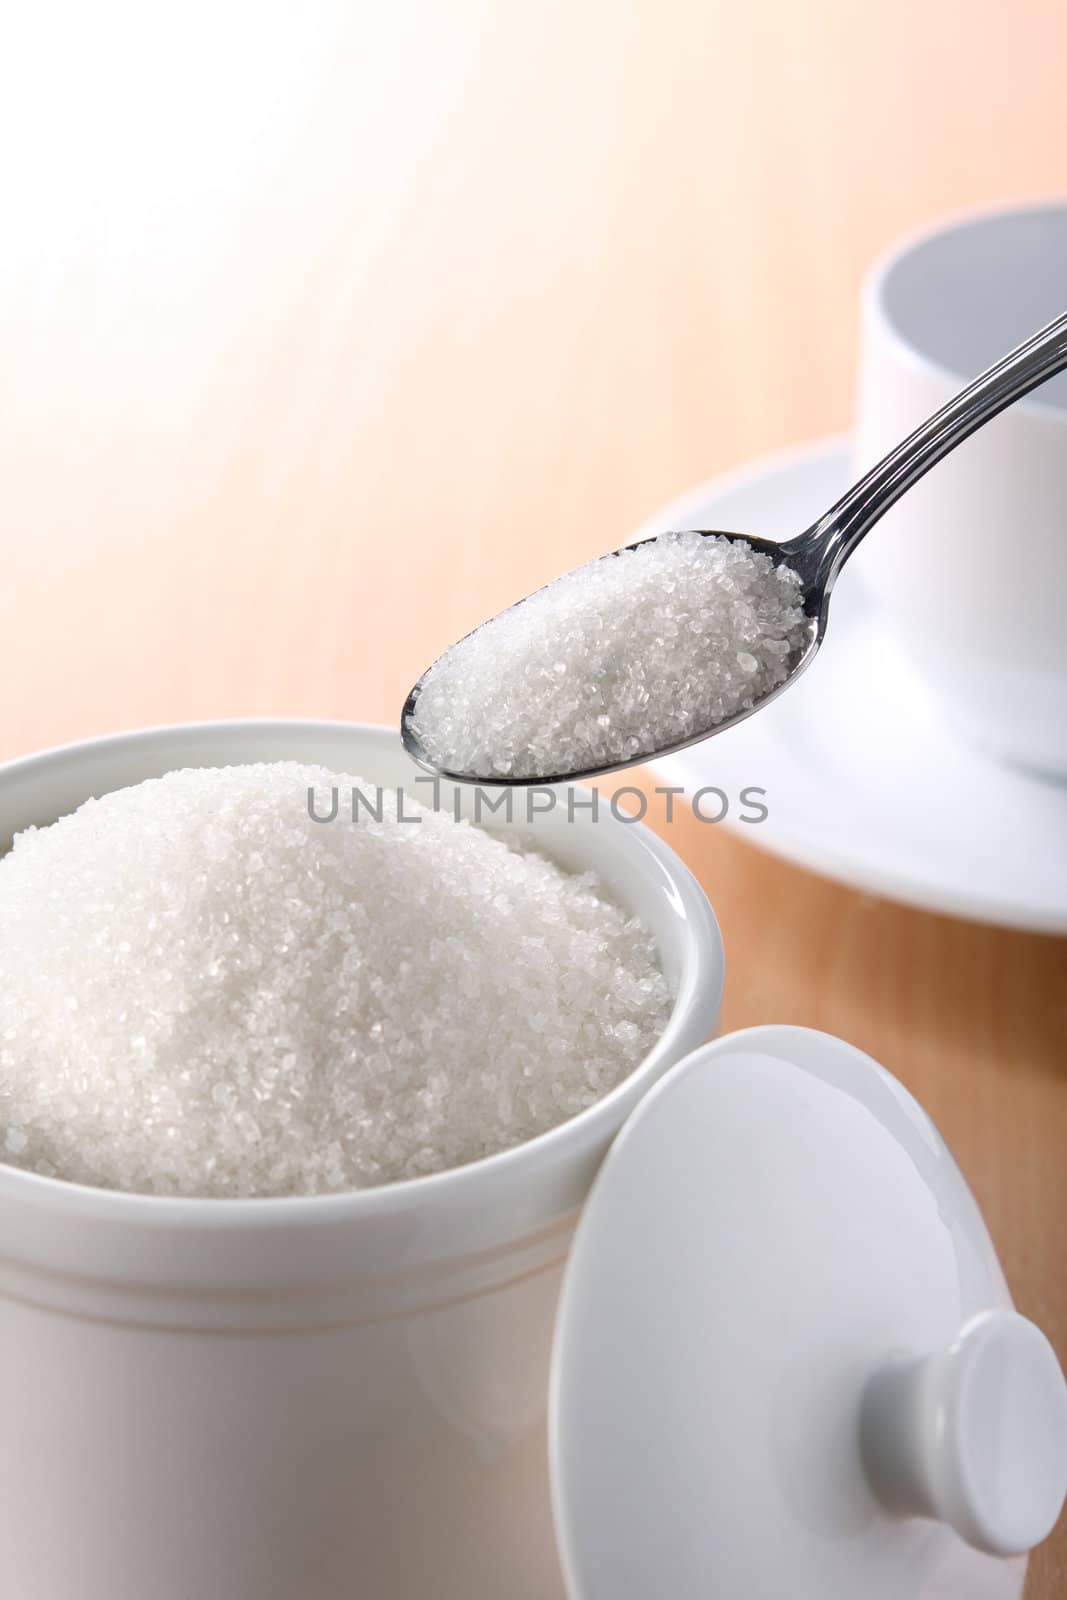 A teaspoonful of sugar for your coffee or tea